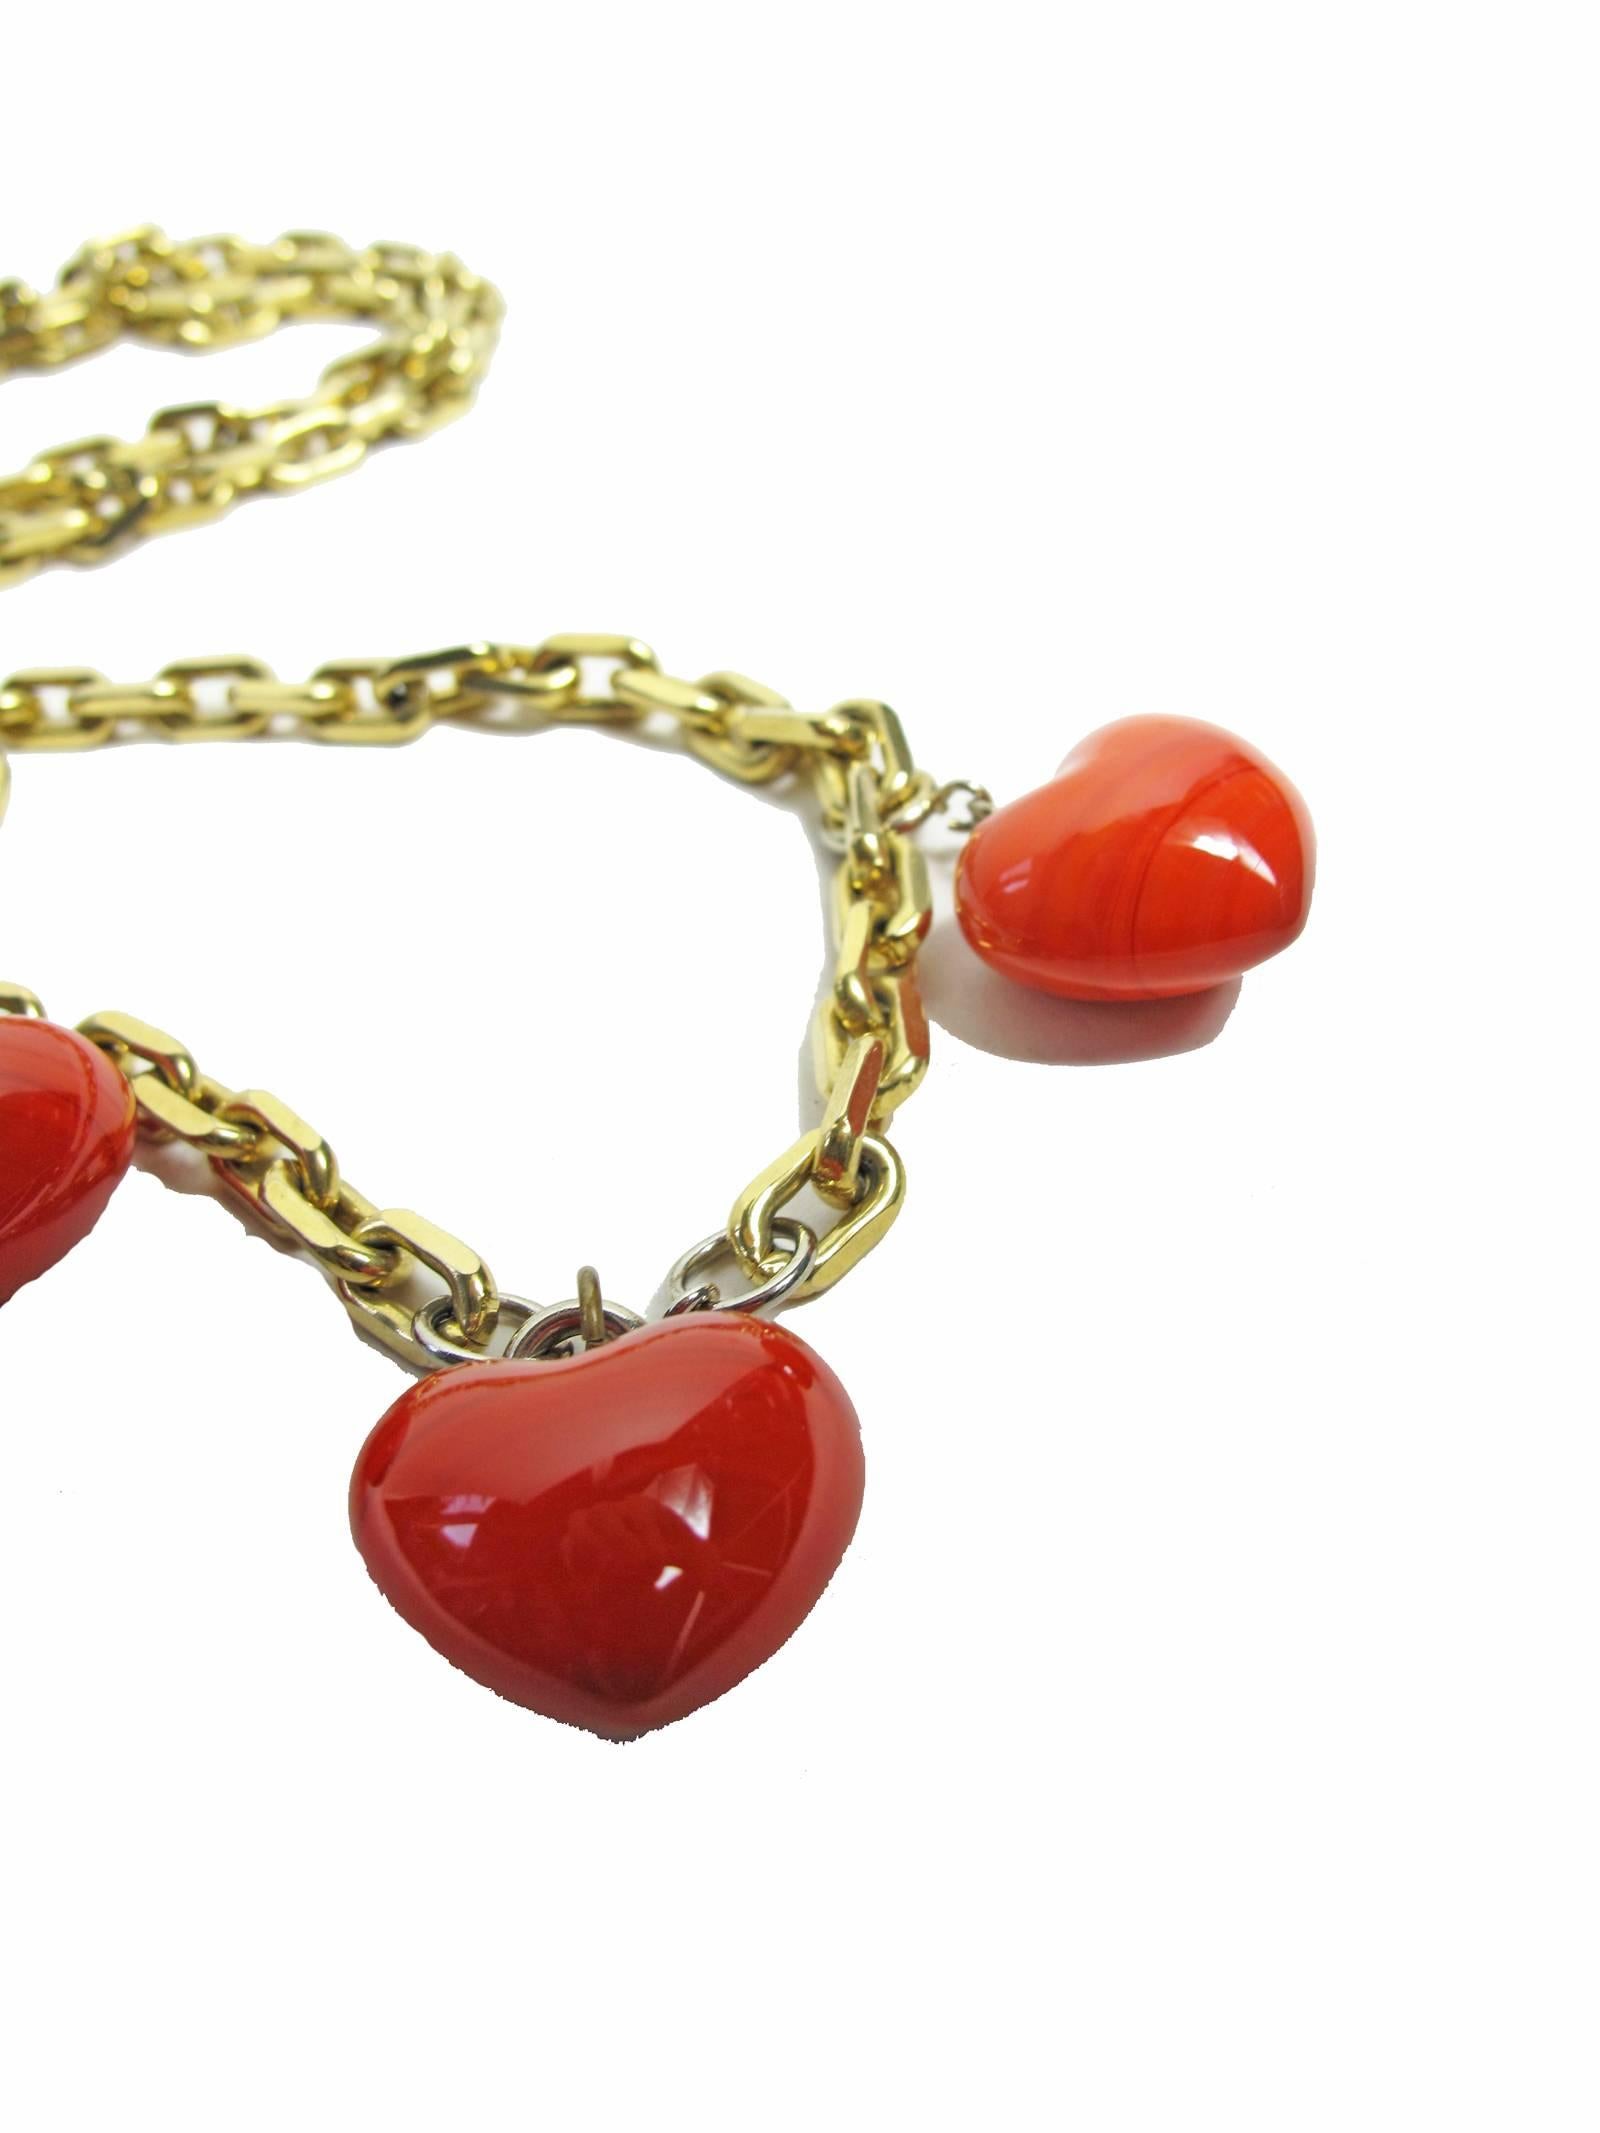 Three red dyed heart shaped agate on long chain necklace.  Condition: Excellent.  One size 
We accept returns for refund, please see our terms.  We offer free ground shipping within the US. Please let us know if you have any questions.